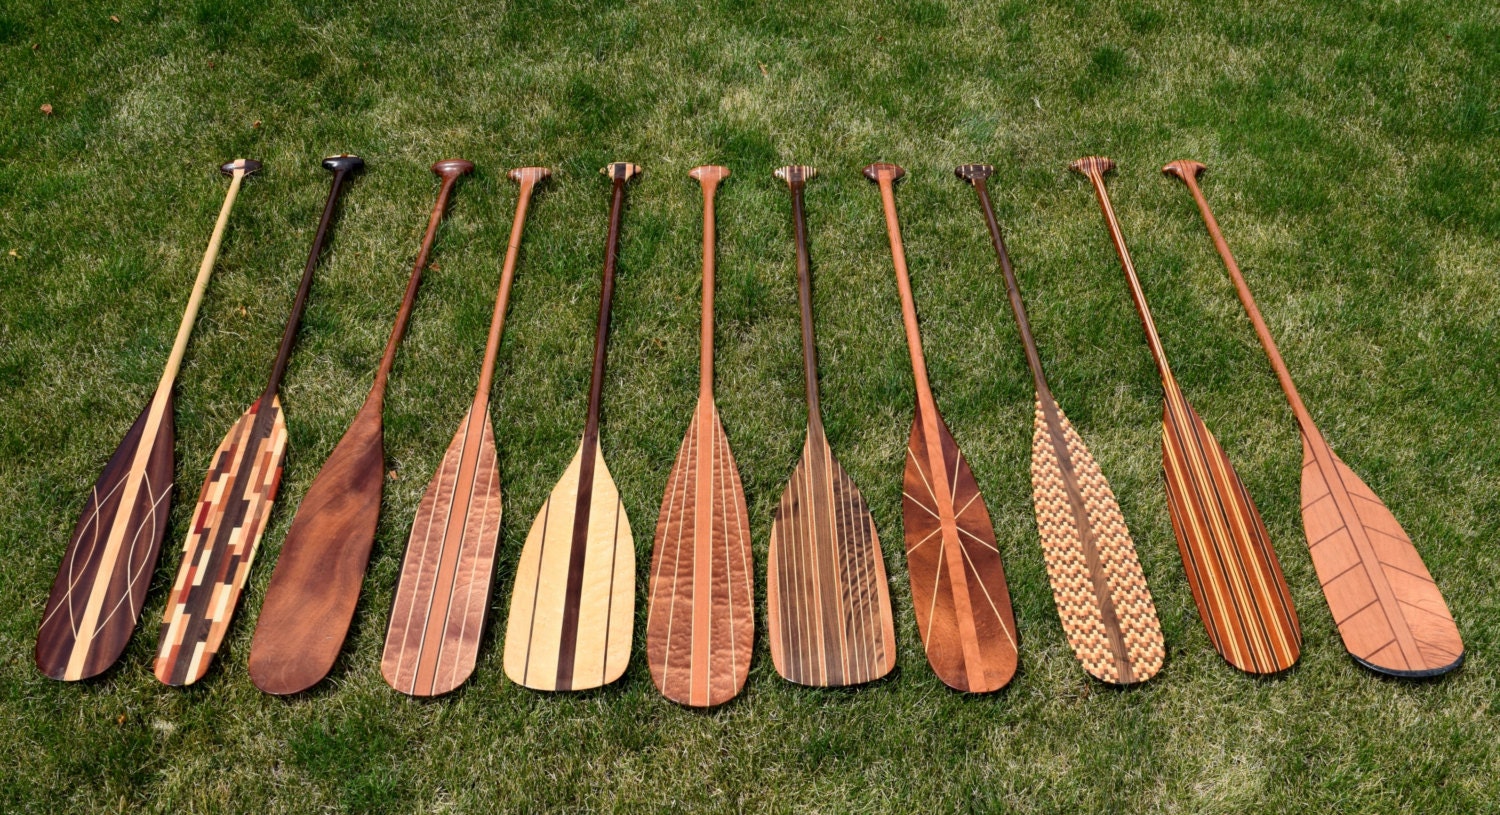 CUSTOM Handcrafted Wooden Canoe and Kayak Paddles